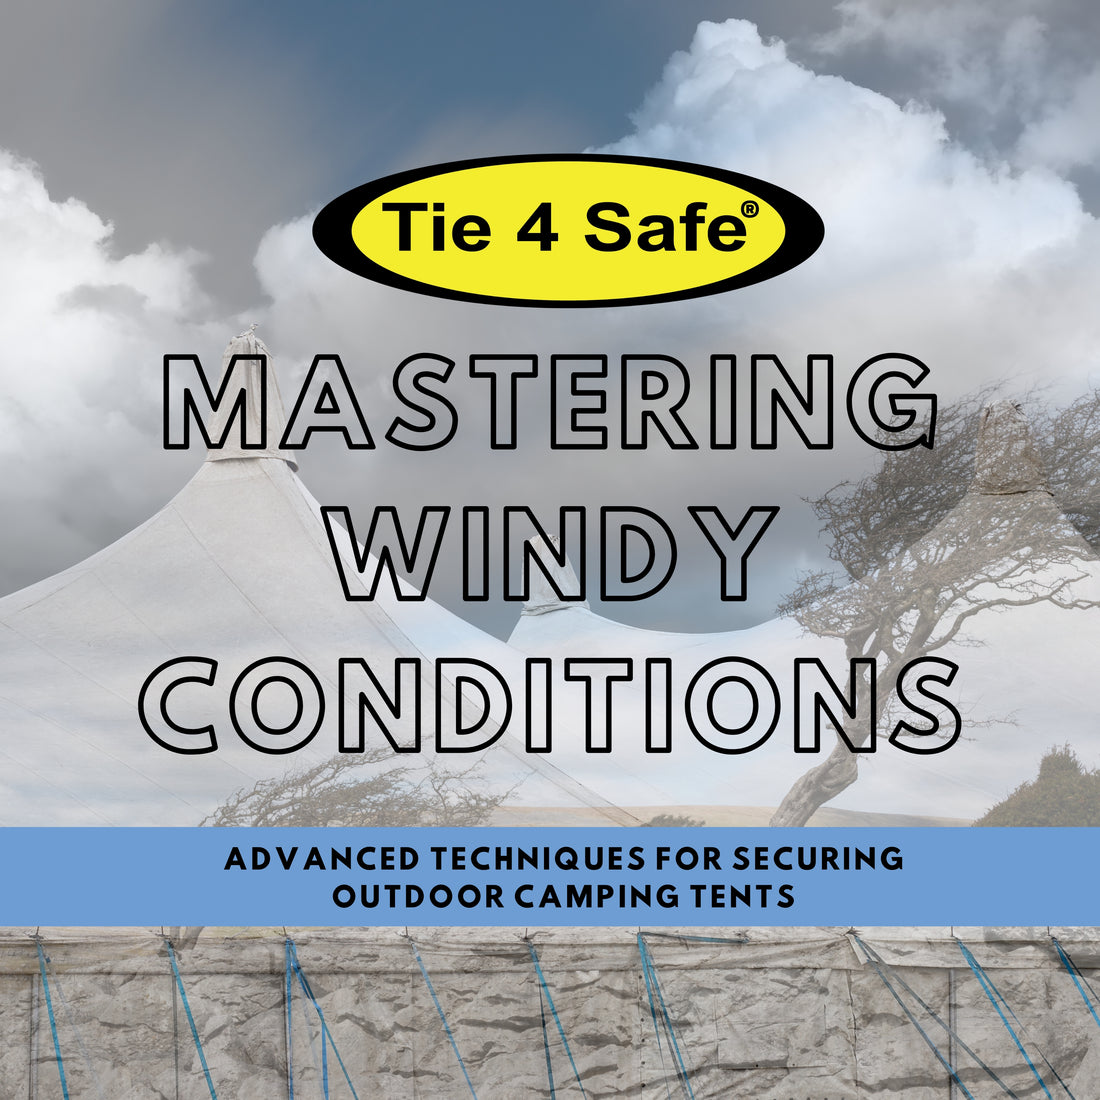 Mastering Windy Conditions: Advanced Techniques for Securing Outdoor Camping Tents